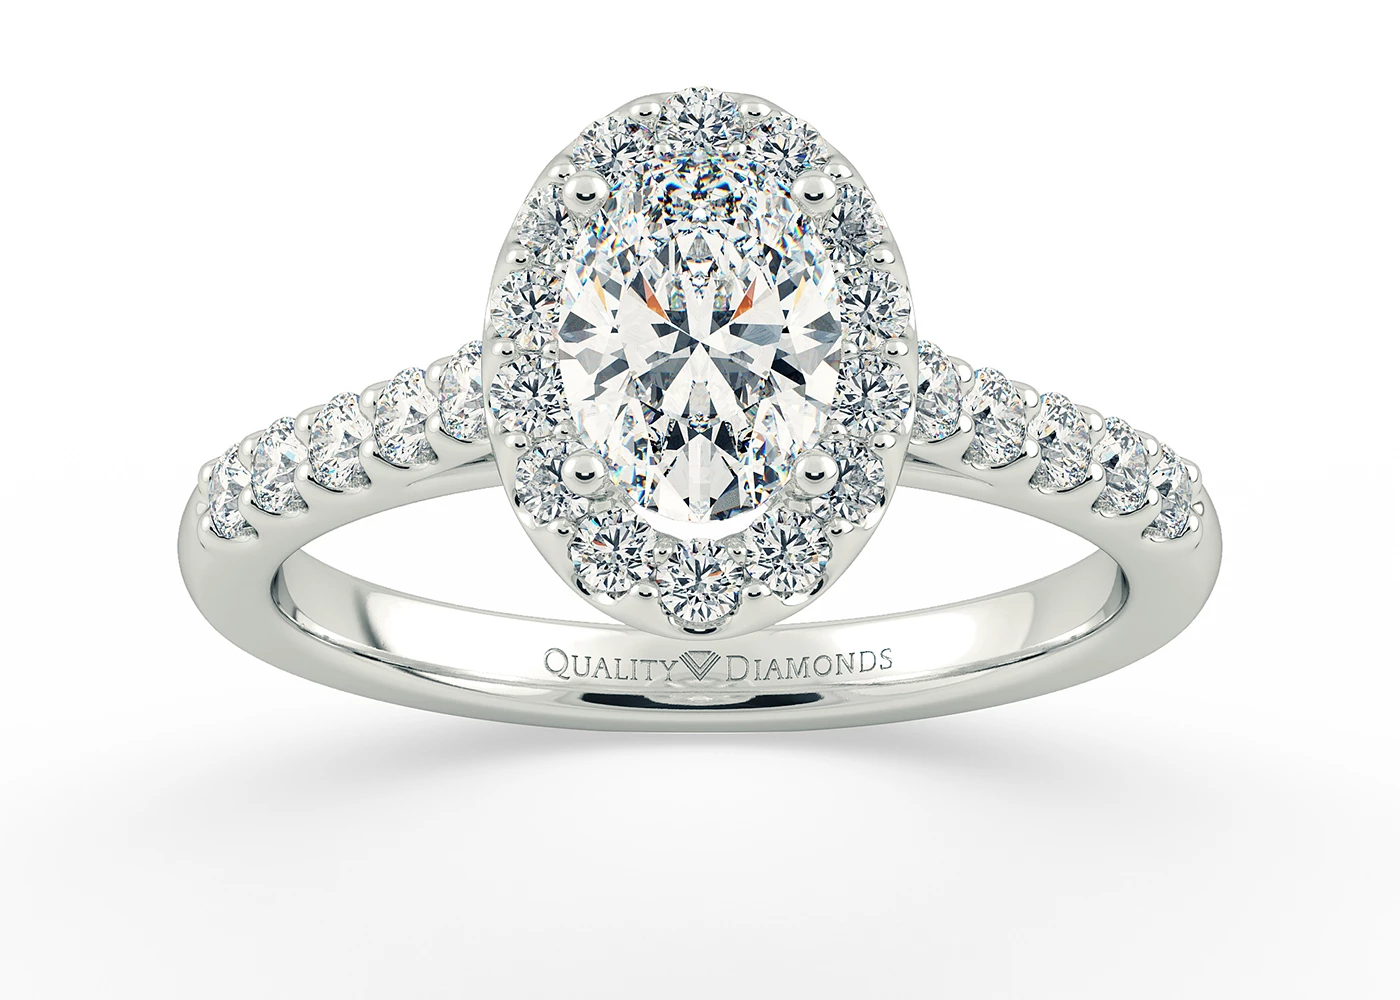 Two Carat Halo Oval Diamond Ring in 9K White Gold